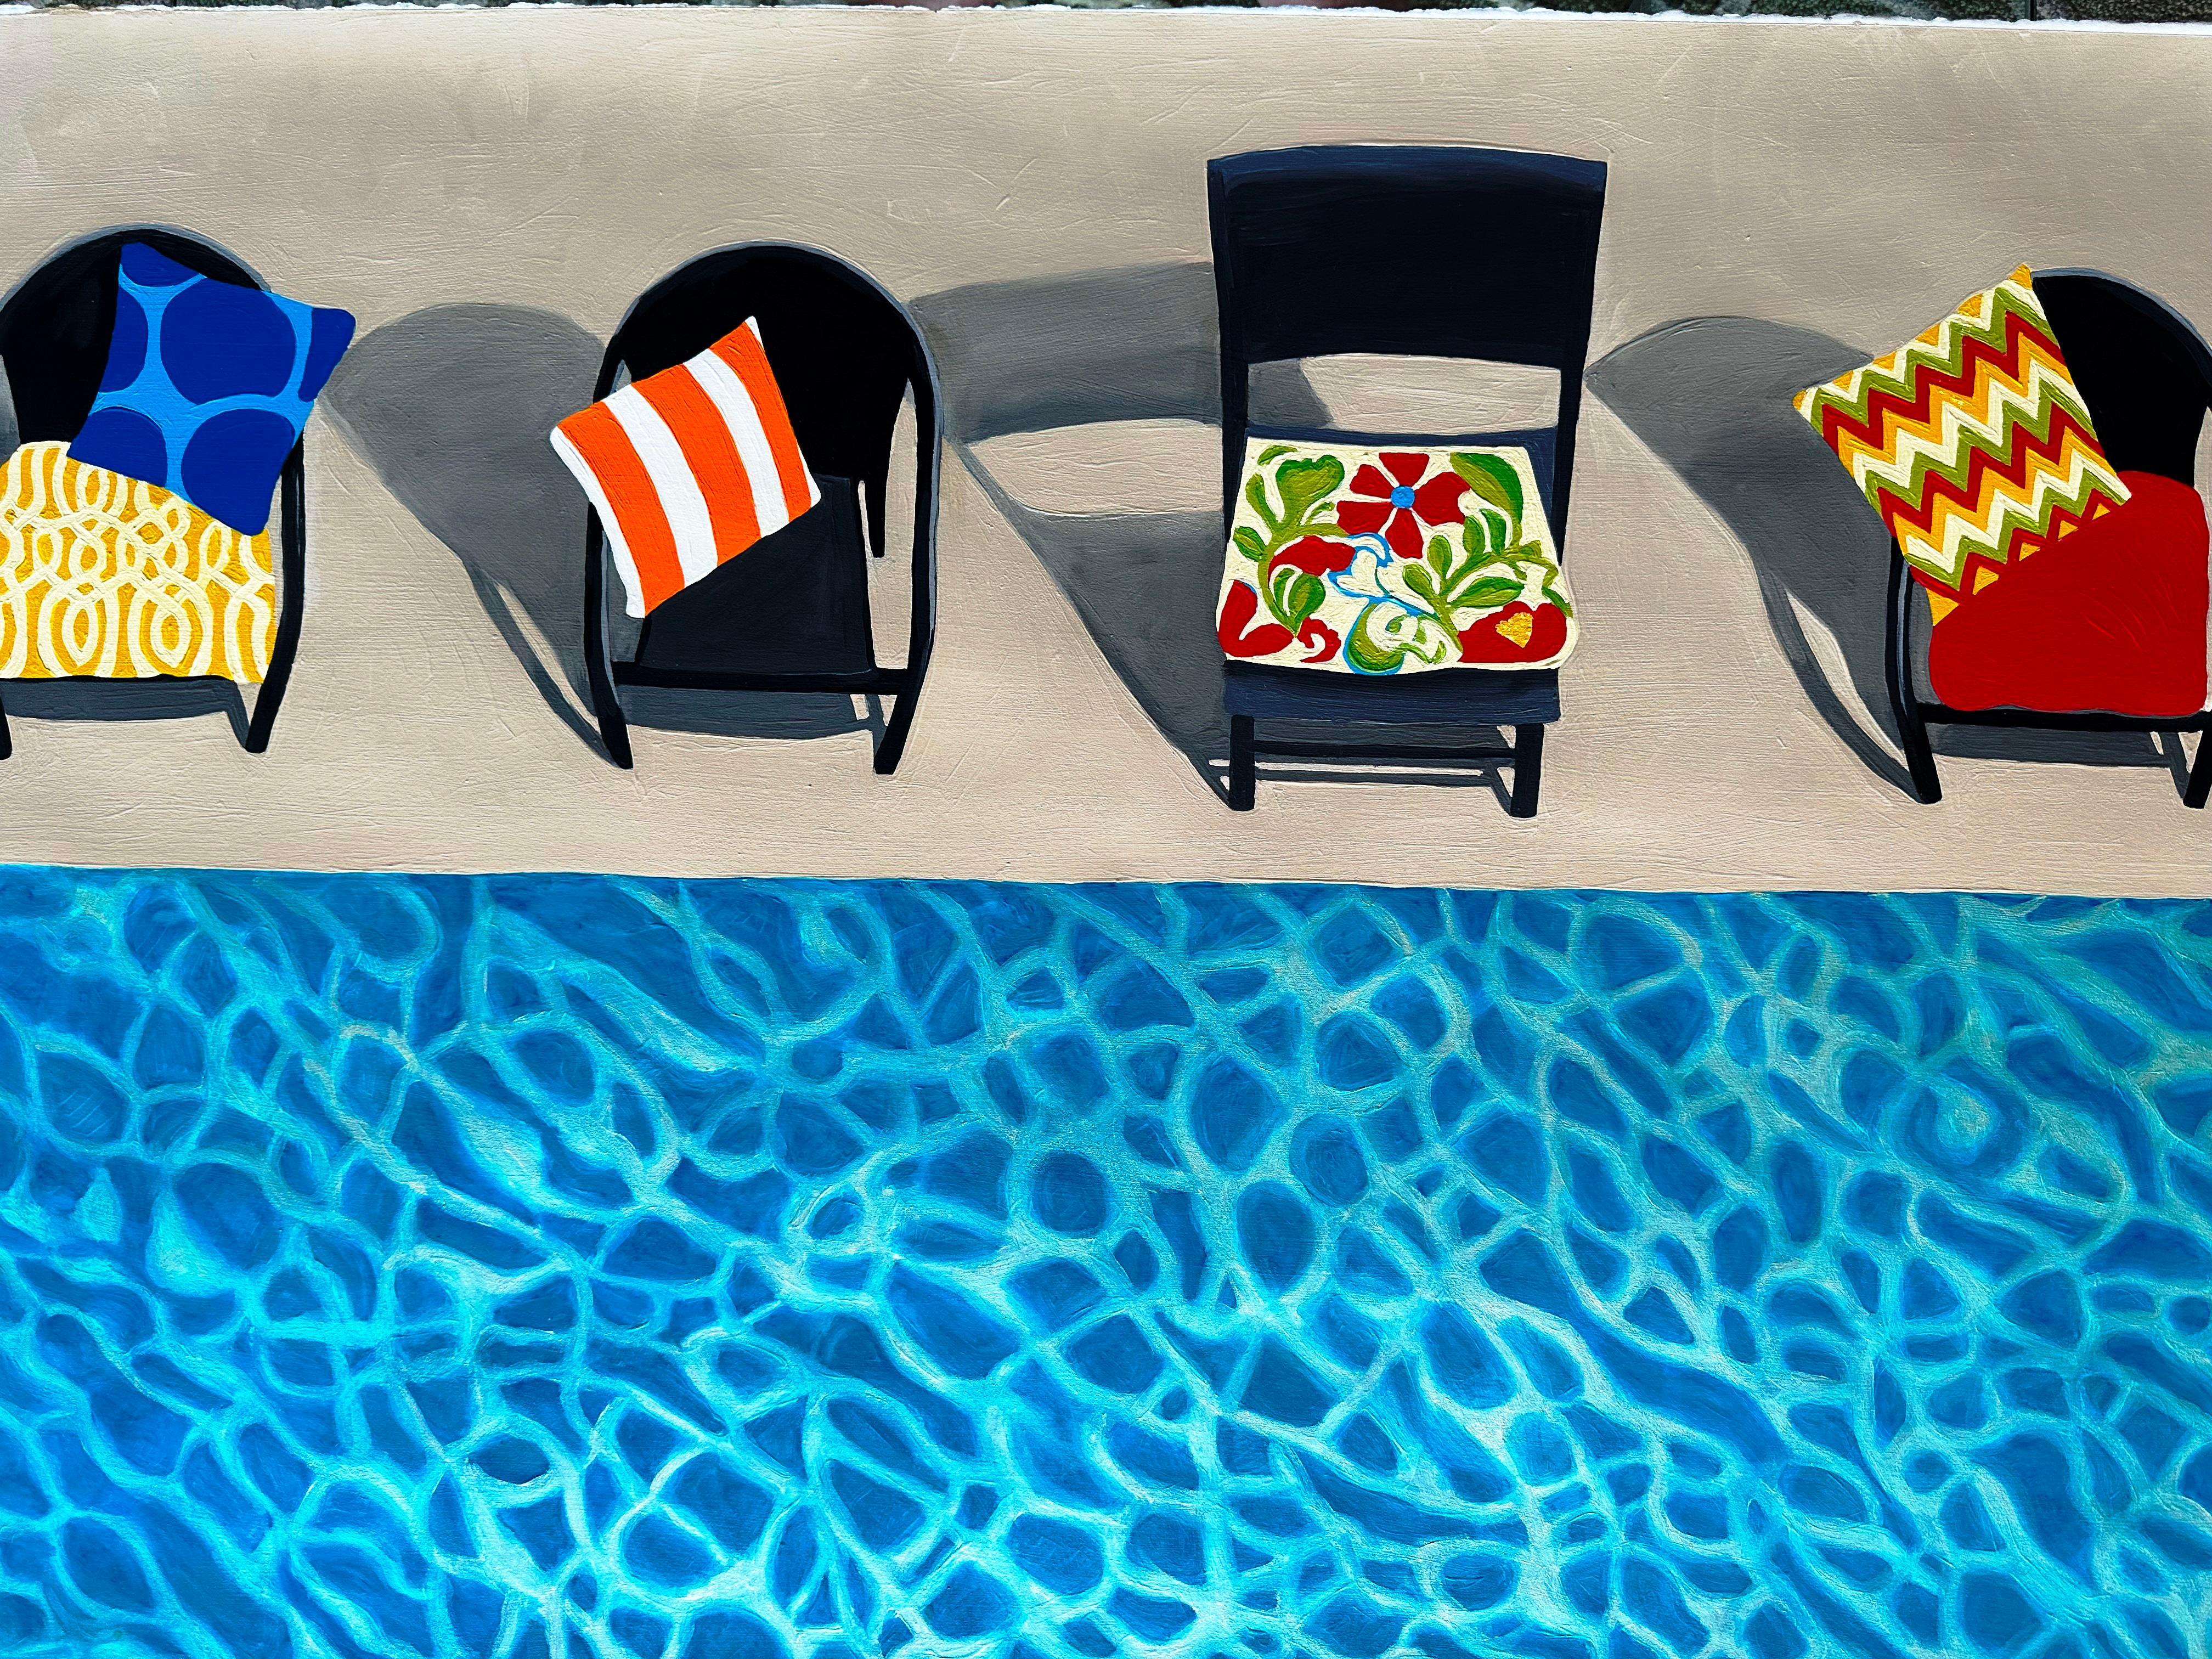 Debbie Carfagno Still-Life - Four Chairs at Poolside